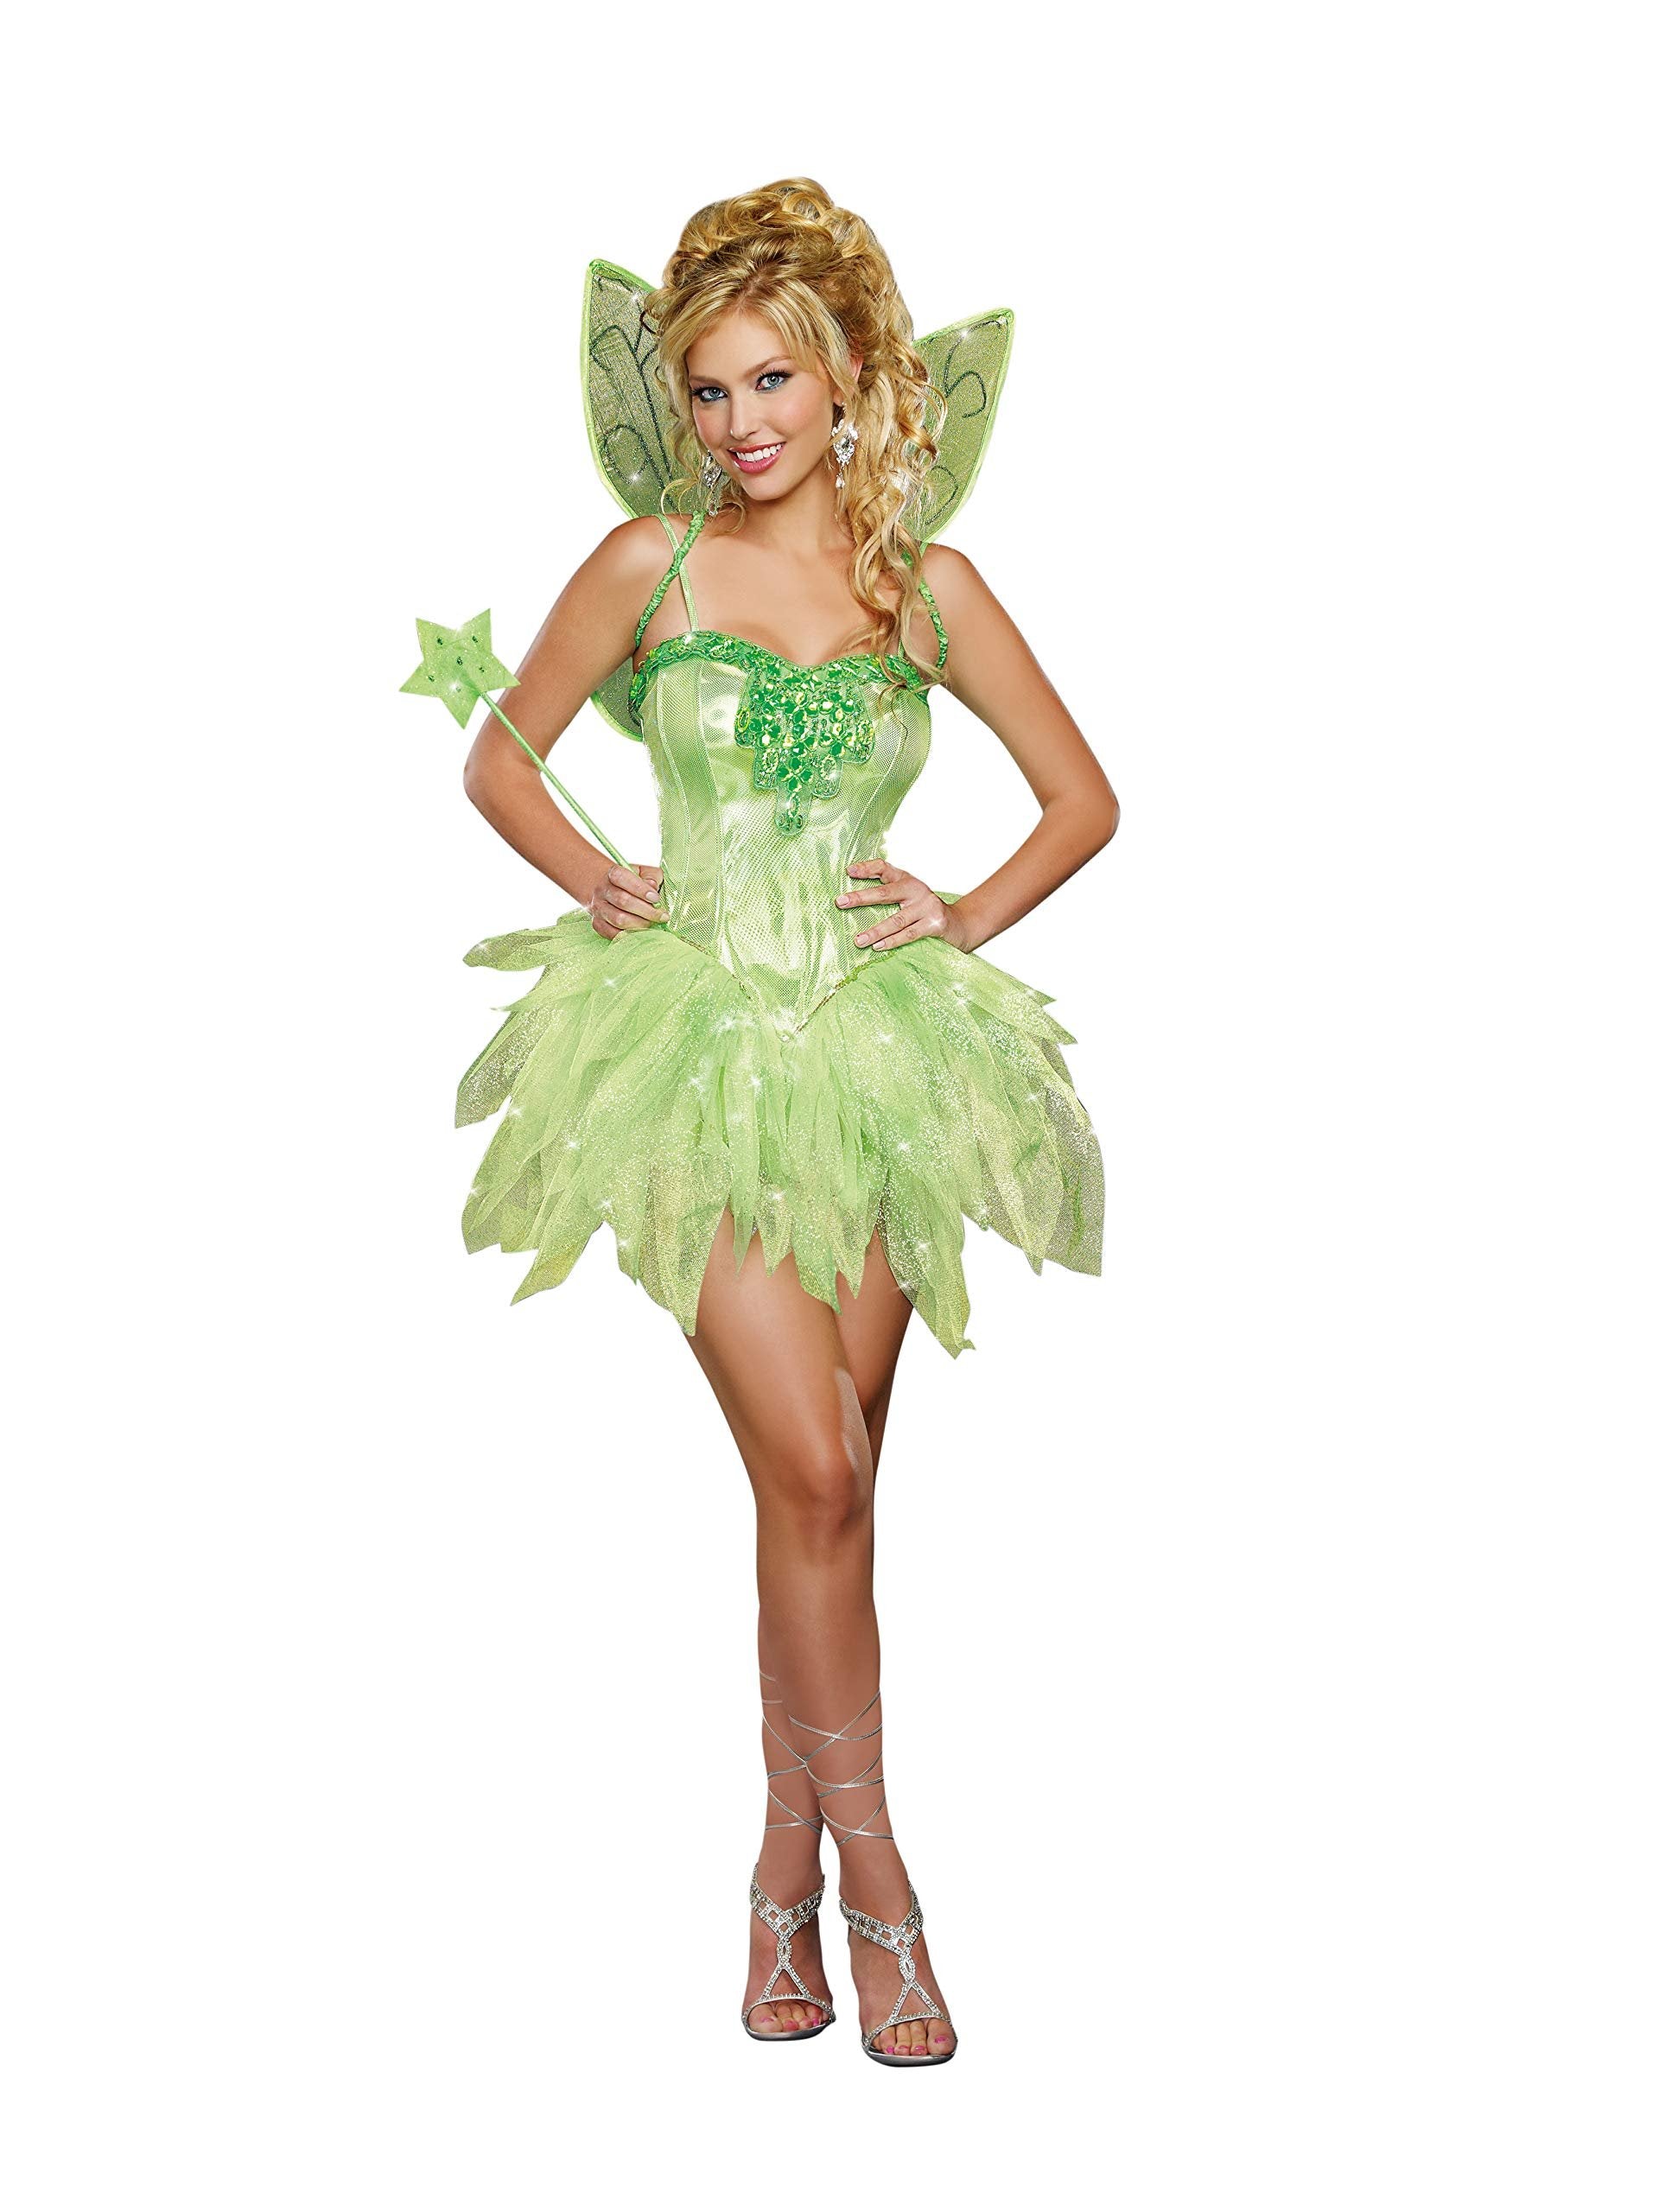 Dreamgirl Fairy-Licious Costume Green Small - Free Shipping & Returns